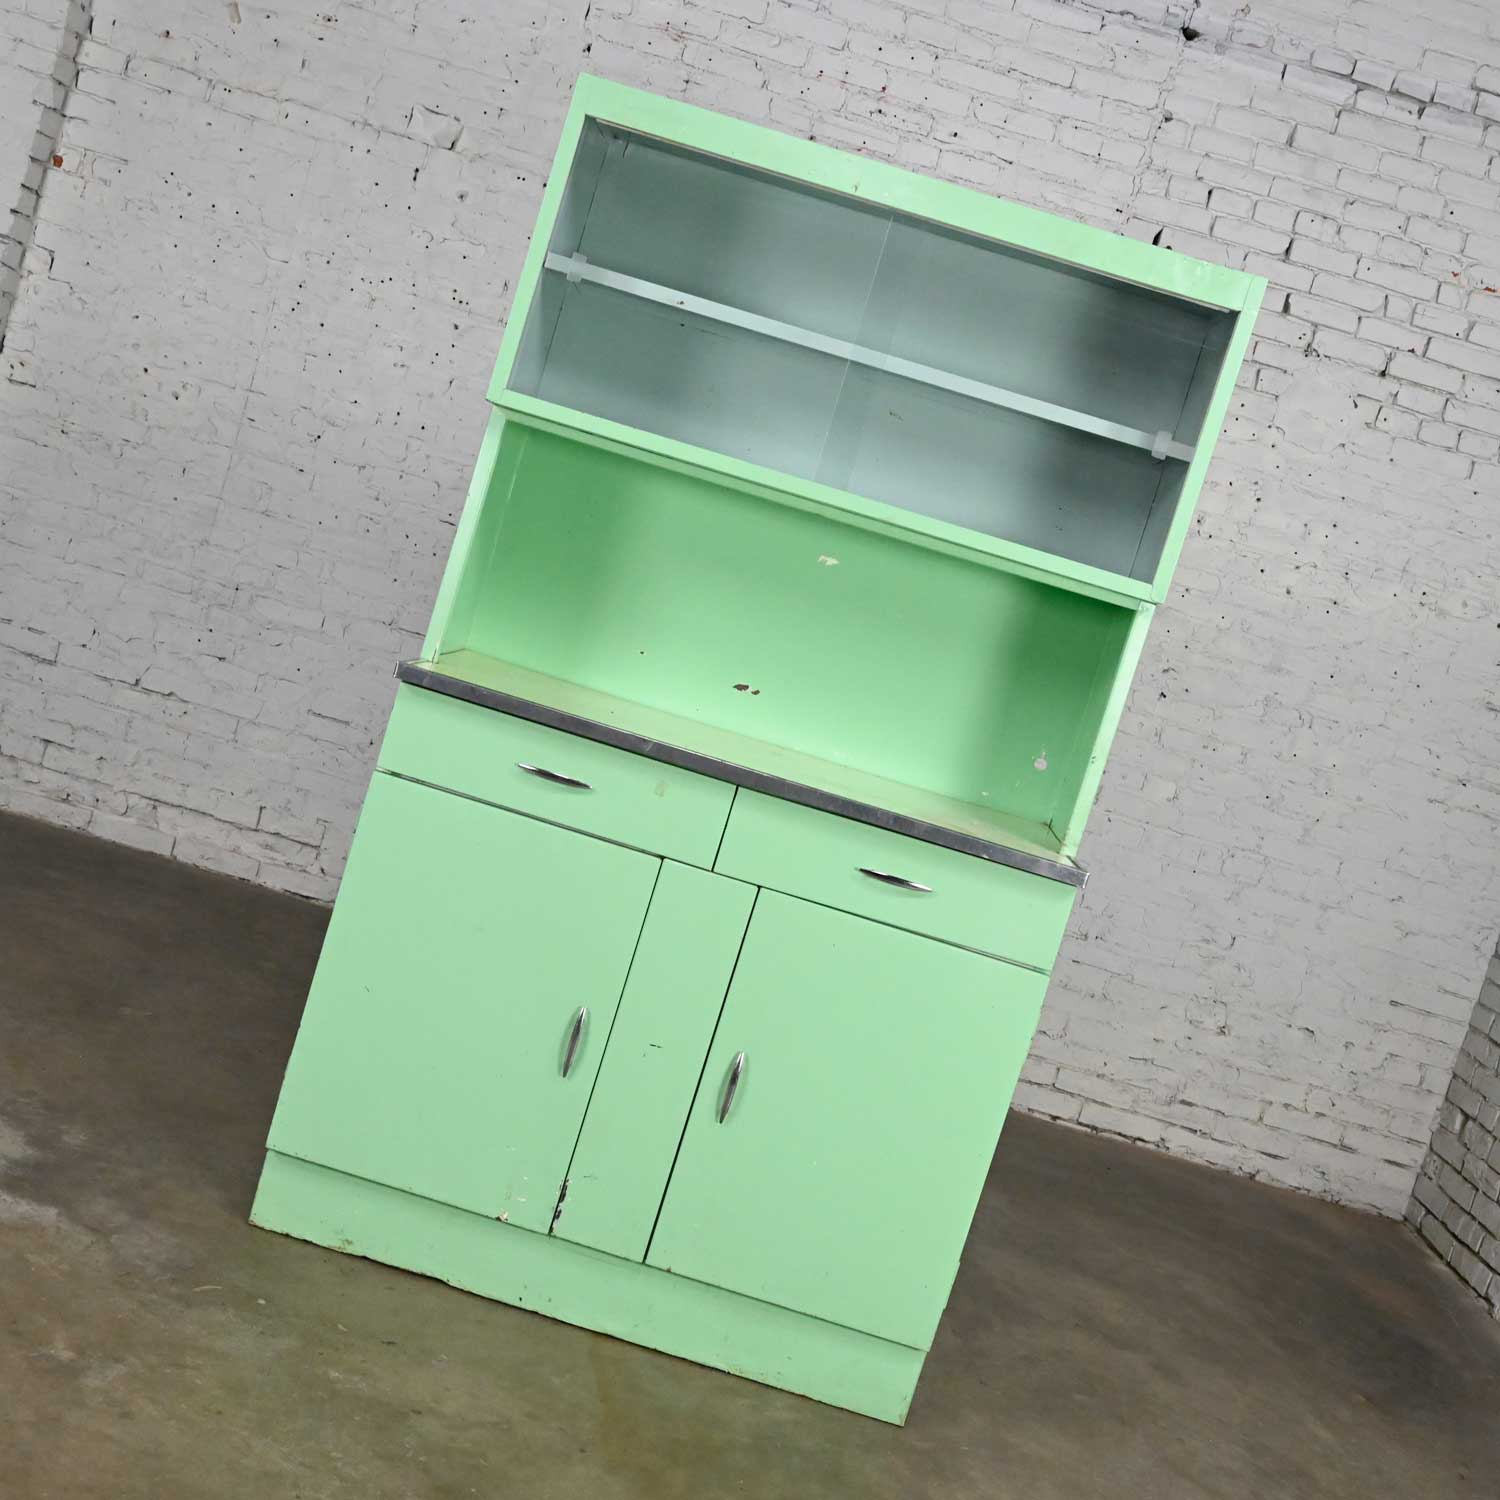 Vintage Industrial Turquoise Metal Cupboard or Cabinet with Upper Glass Doors